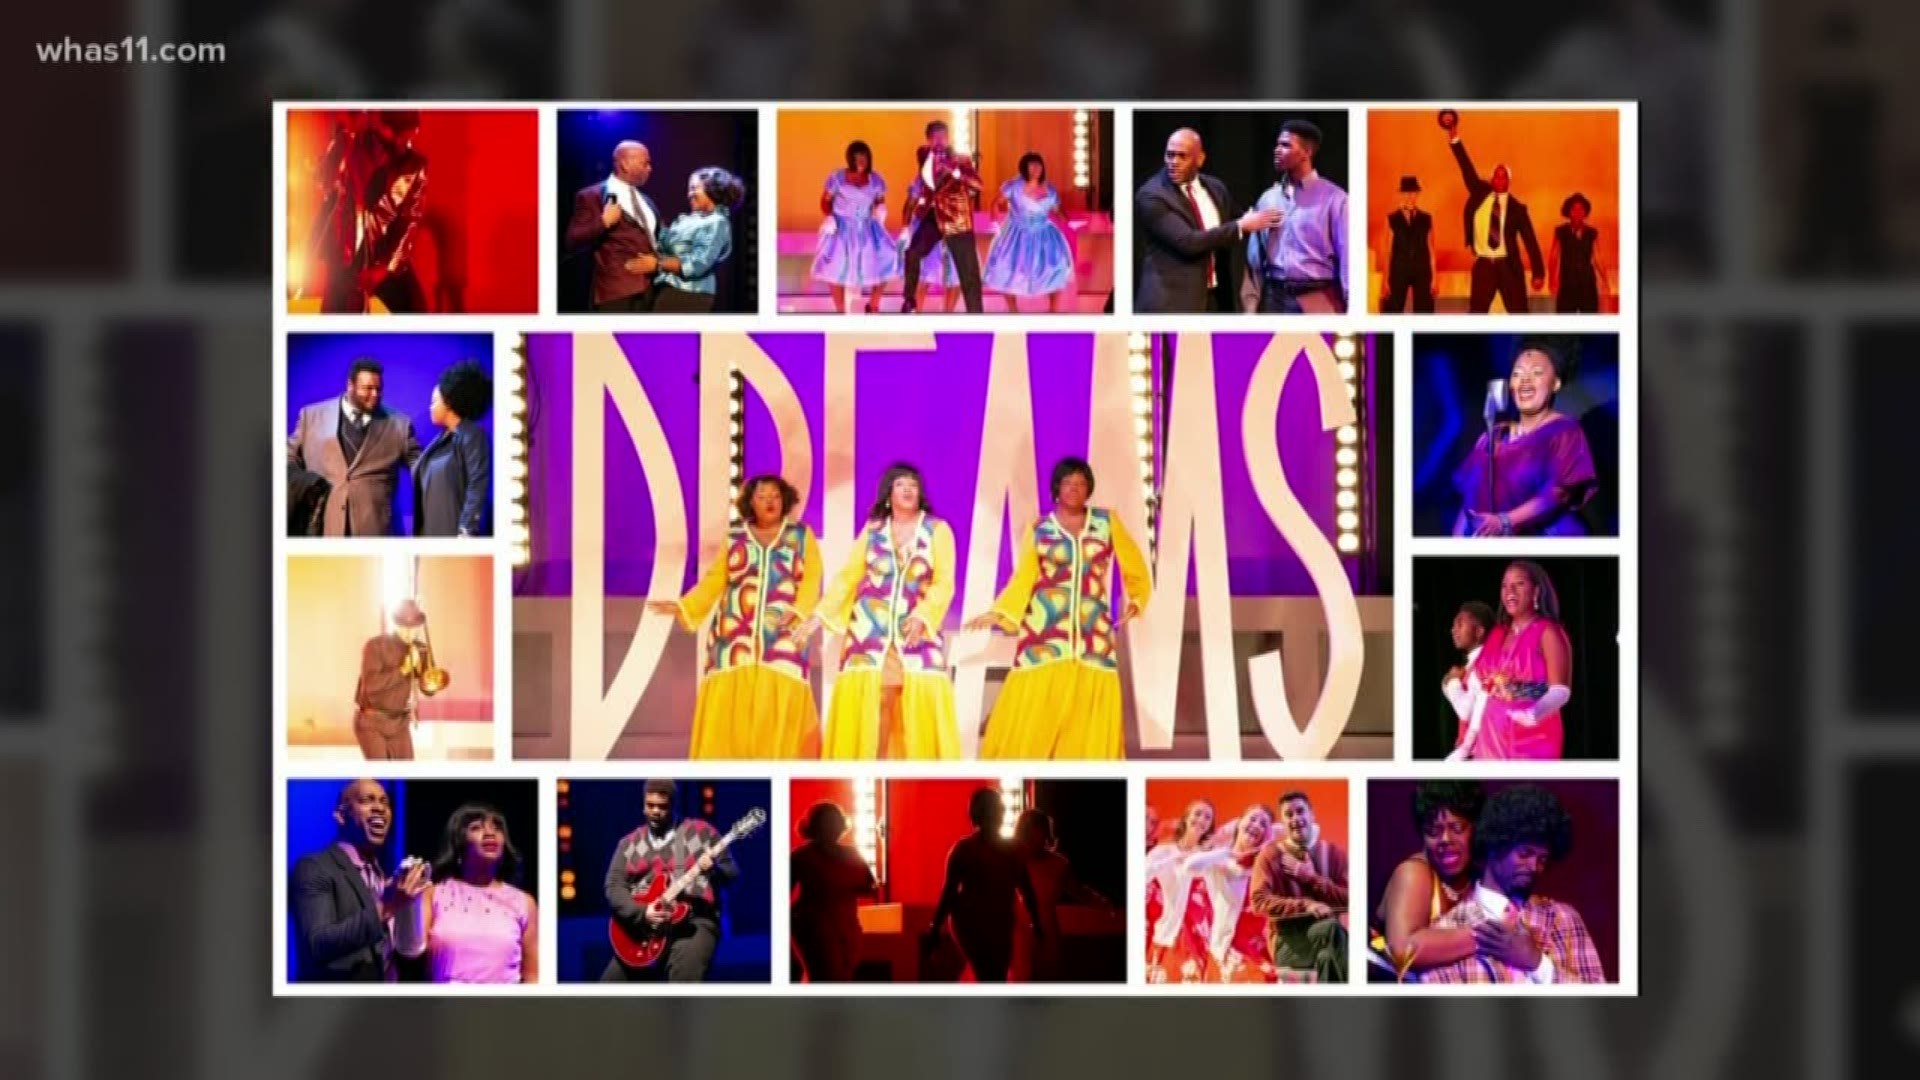 Dreamgirls will be performed Thursdays, Saturdays and Mondays through September 22 at the Jewish Community Center.